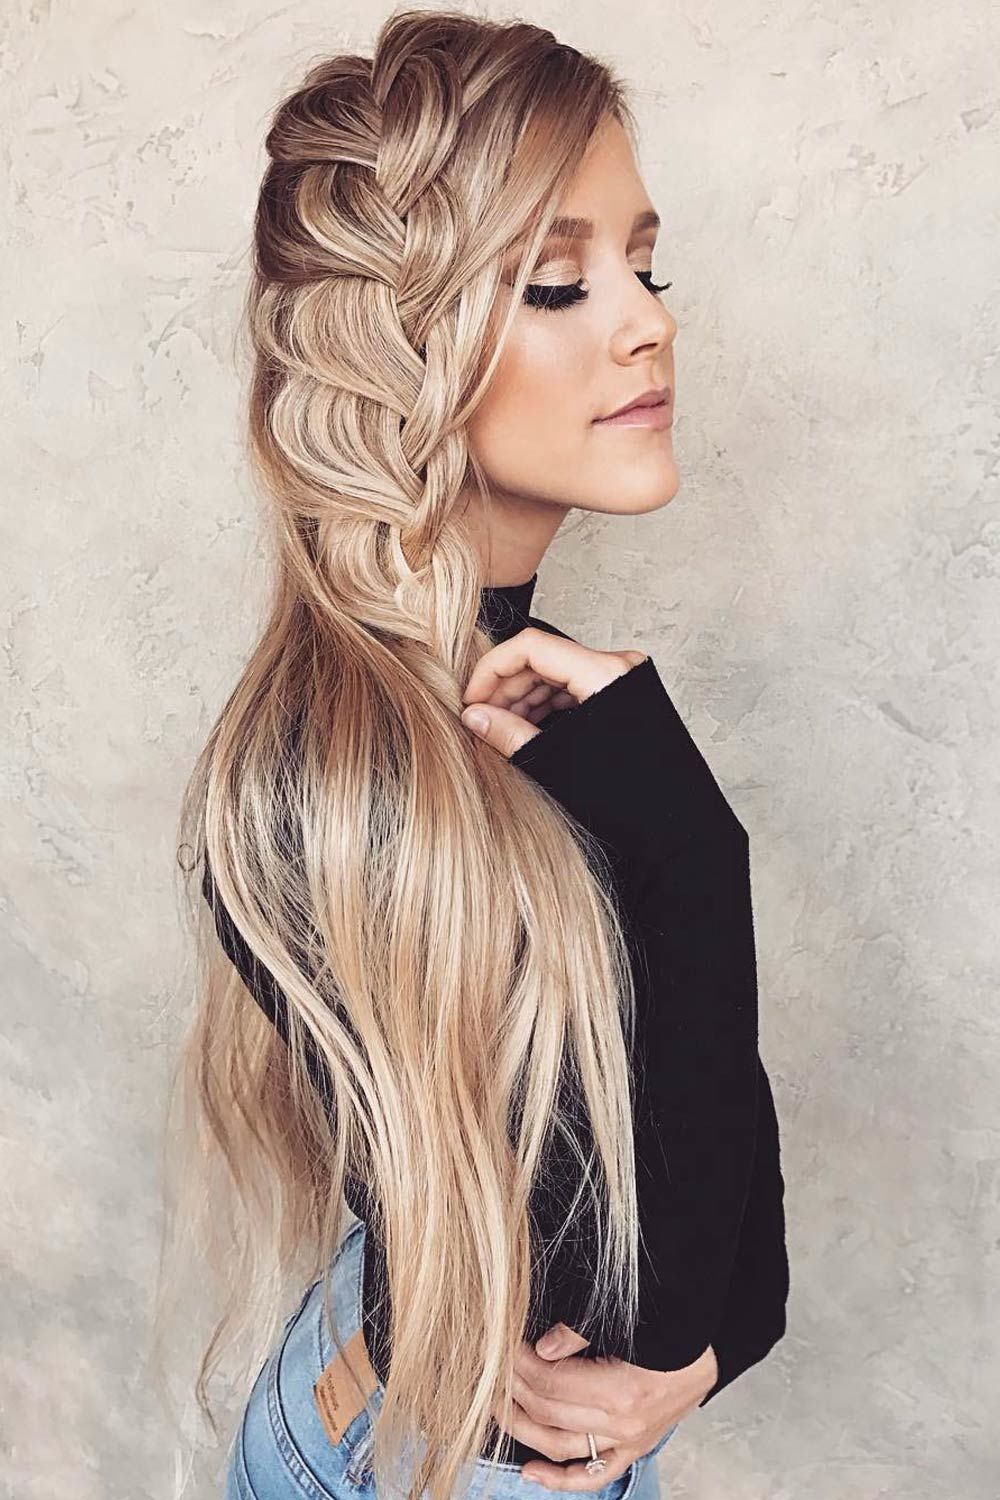 Graduation Hairstyles To Make Your Cap Fit Like A Glove